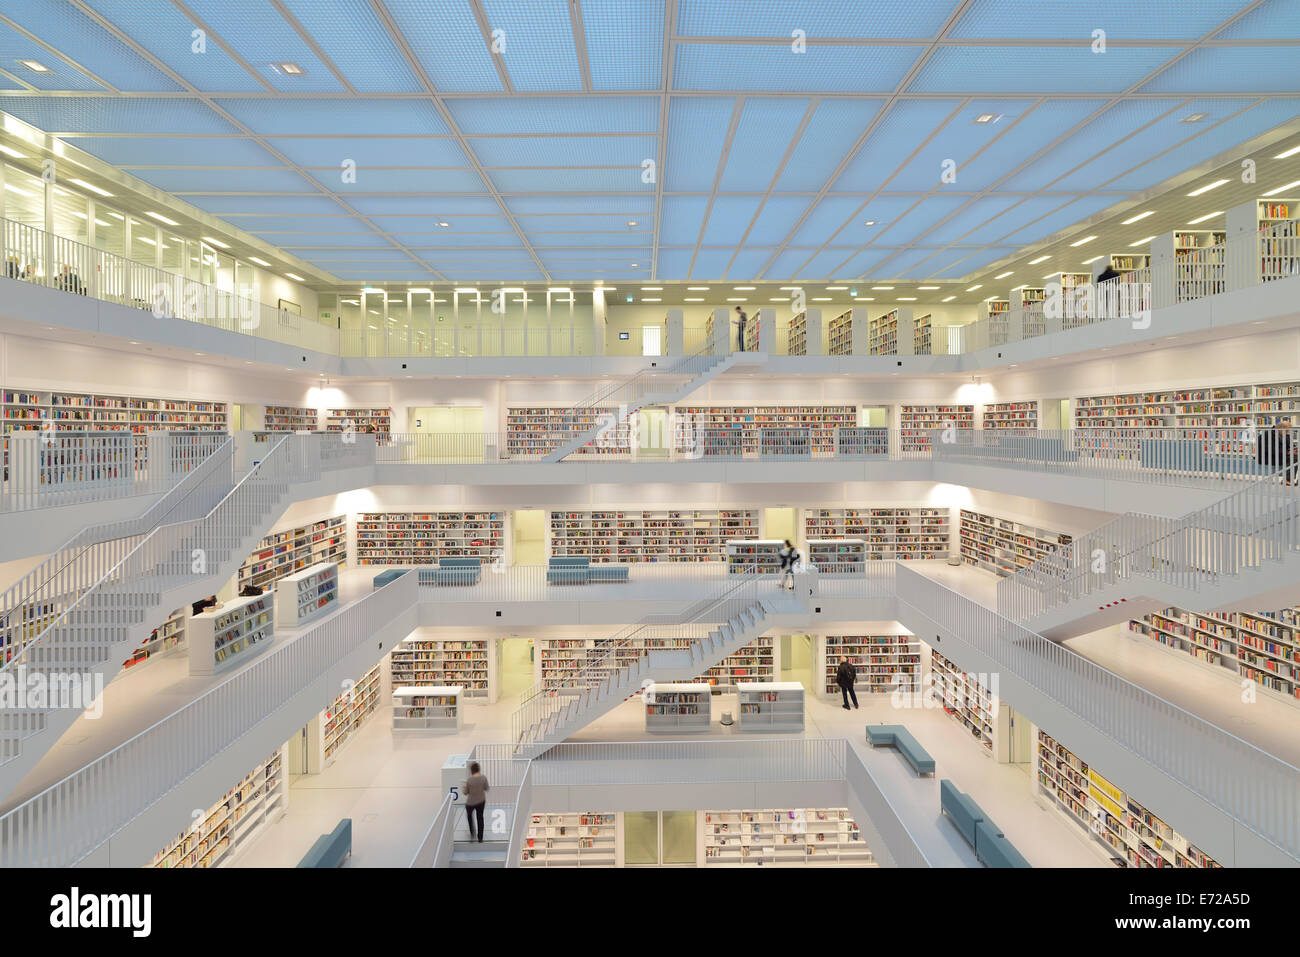 Gallery hall with stairs, Stuttgart City Library by architect Eun Young Yi, Stuttgart, Baden-Württemberg, Germany Stock Photo